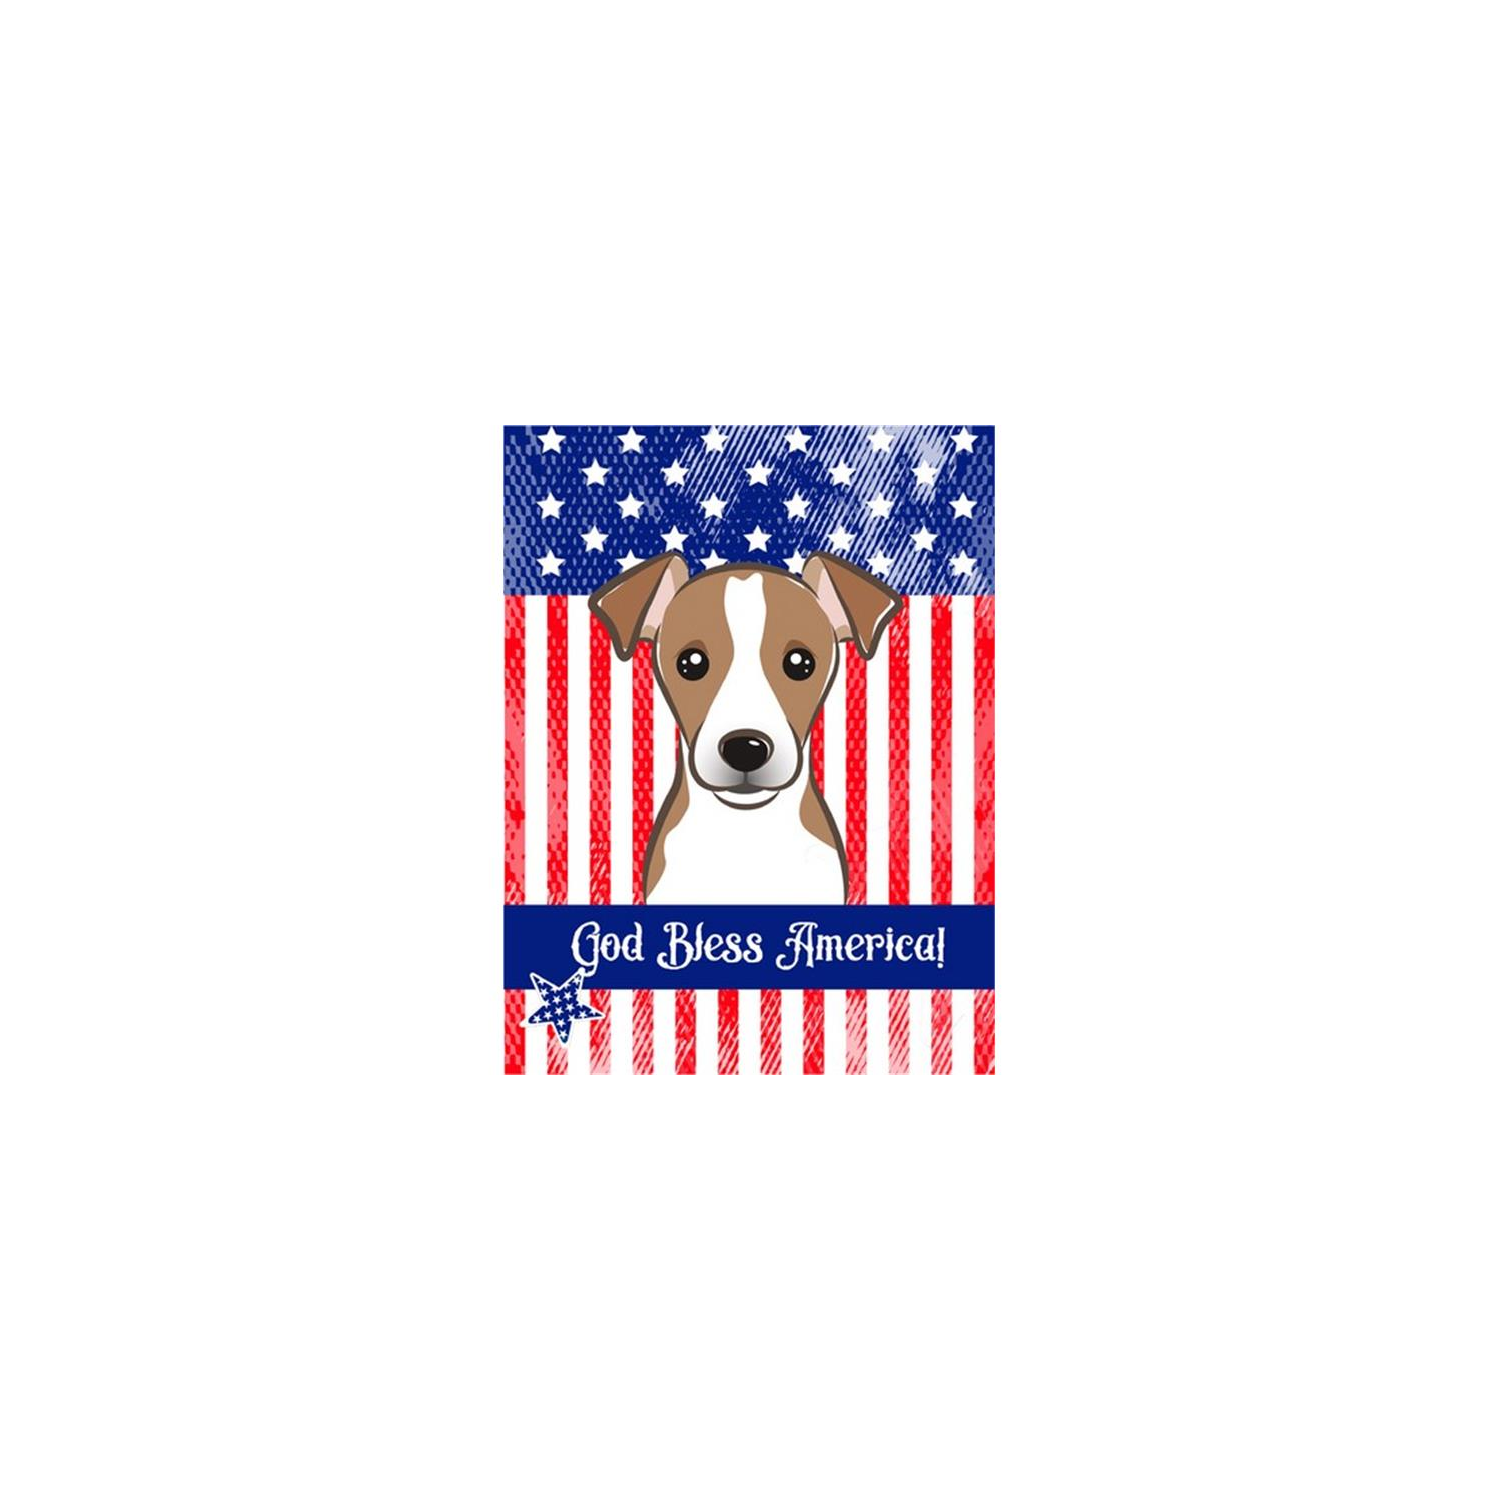 Carolines Treasures BB2190GF God Bless American Flag with Jack Russell Terrier Flag Garden